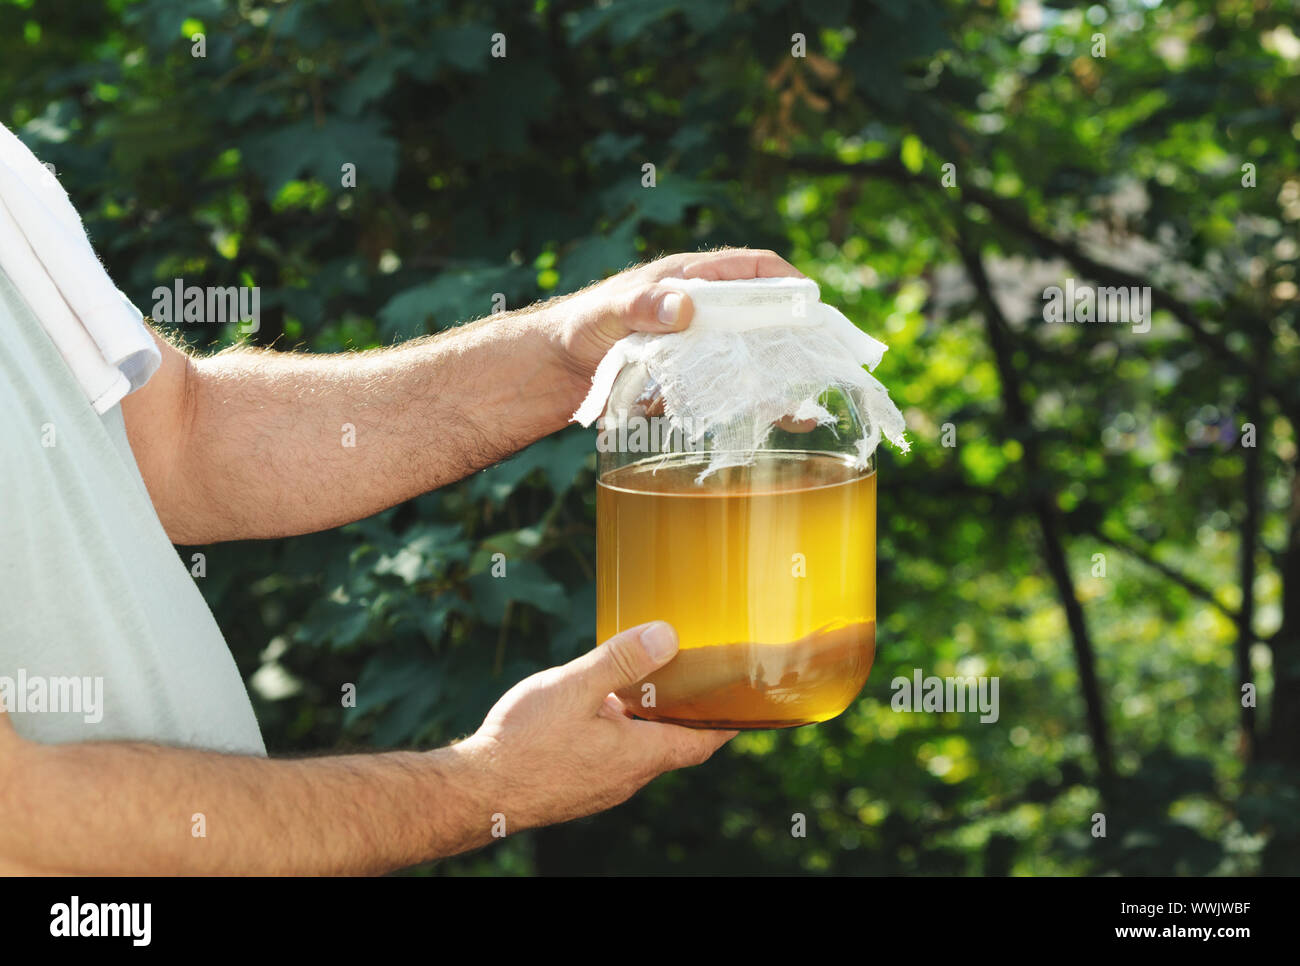 Man with a glass jar filled with tea mushroom homemade  kombucha tea in the garden. Fermented drink, jun tea healthy natural probiotic in a glass jar. Stock Photo